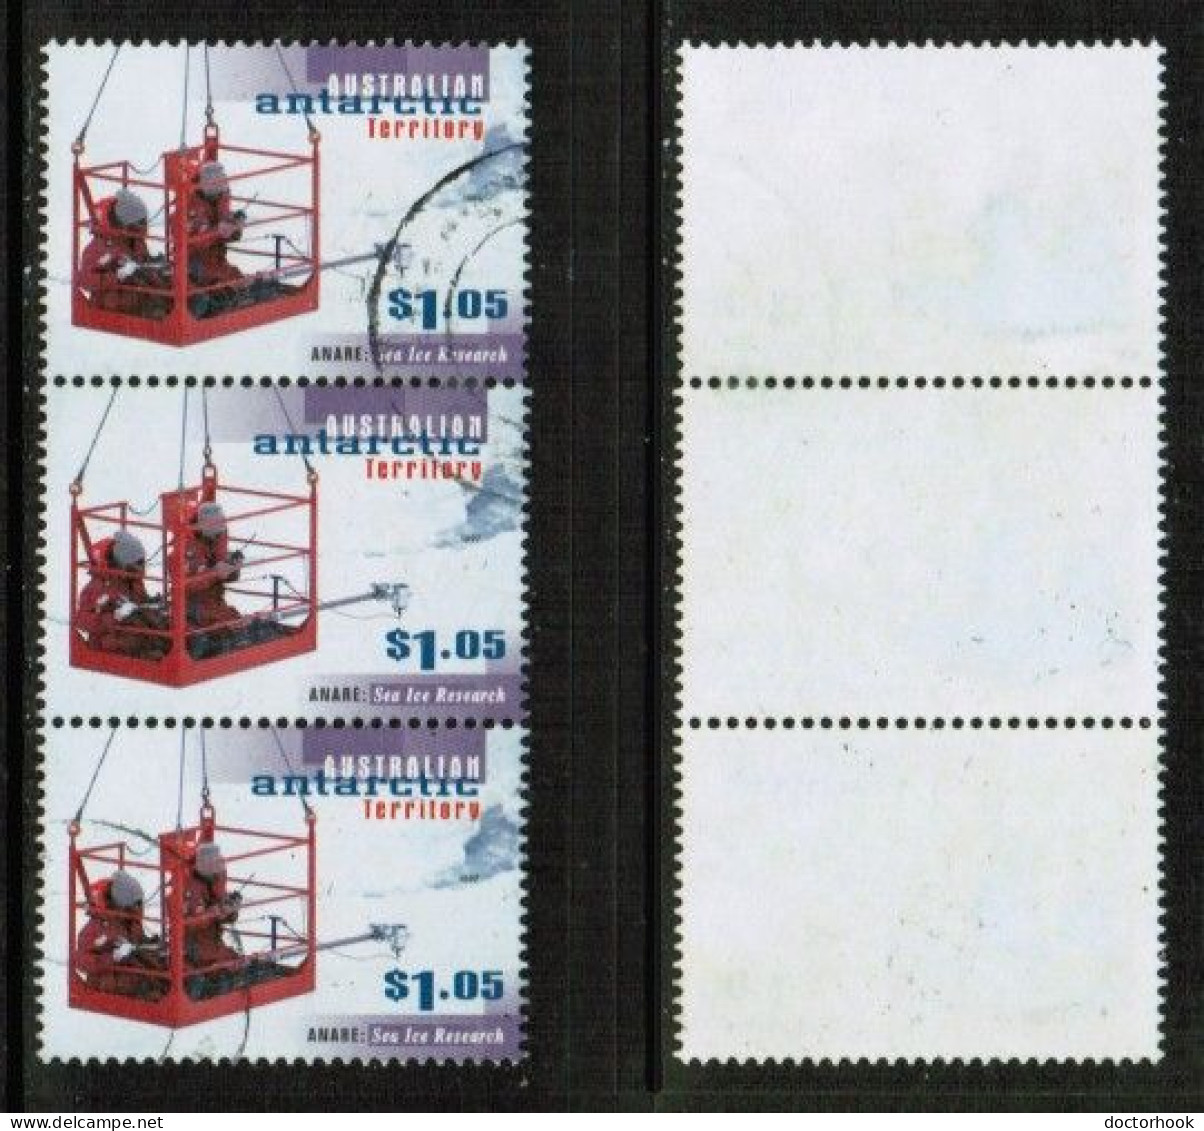 AUSTRALIAN ANTARCTIC TERRITORY   Scott # L 105 USED STRIP Of 3 (CONDITION AS PER SCAN) (Stamp Scan # 930-2) - Gebraucht